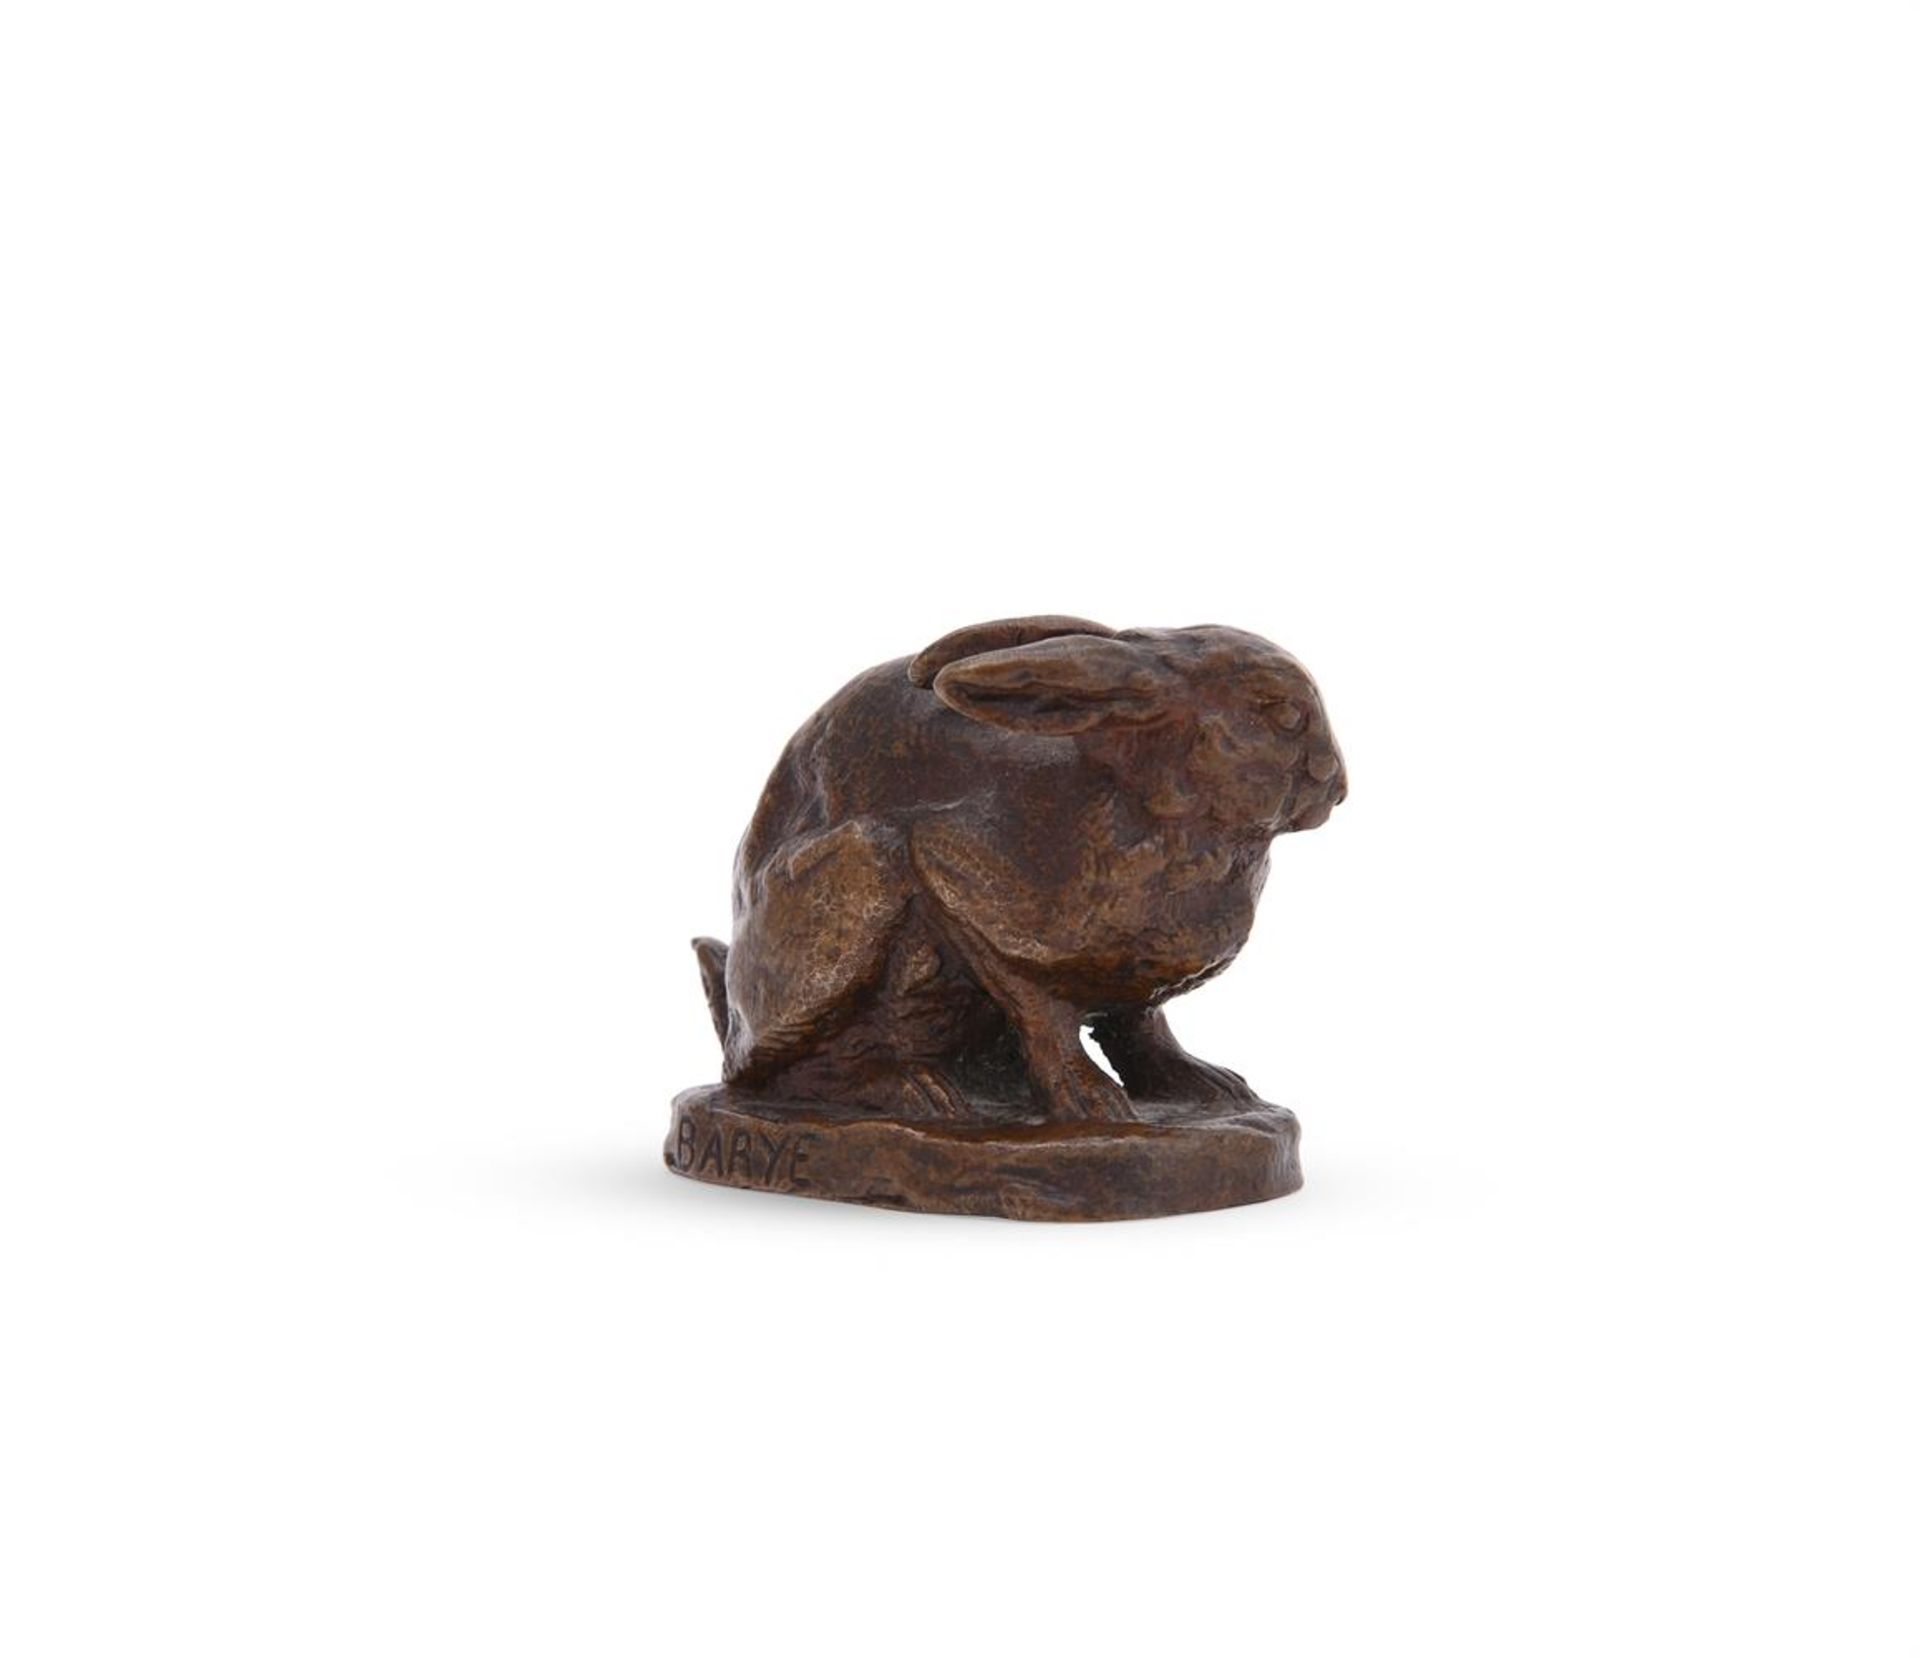 ANTOINE-LOUIS BARYE (FRENCH, 1795-1875), A BRONZE MODEL OF A CROUCHING RABBIT - Image 3 of 6